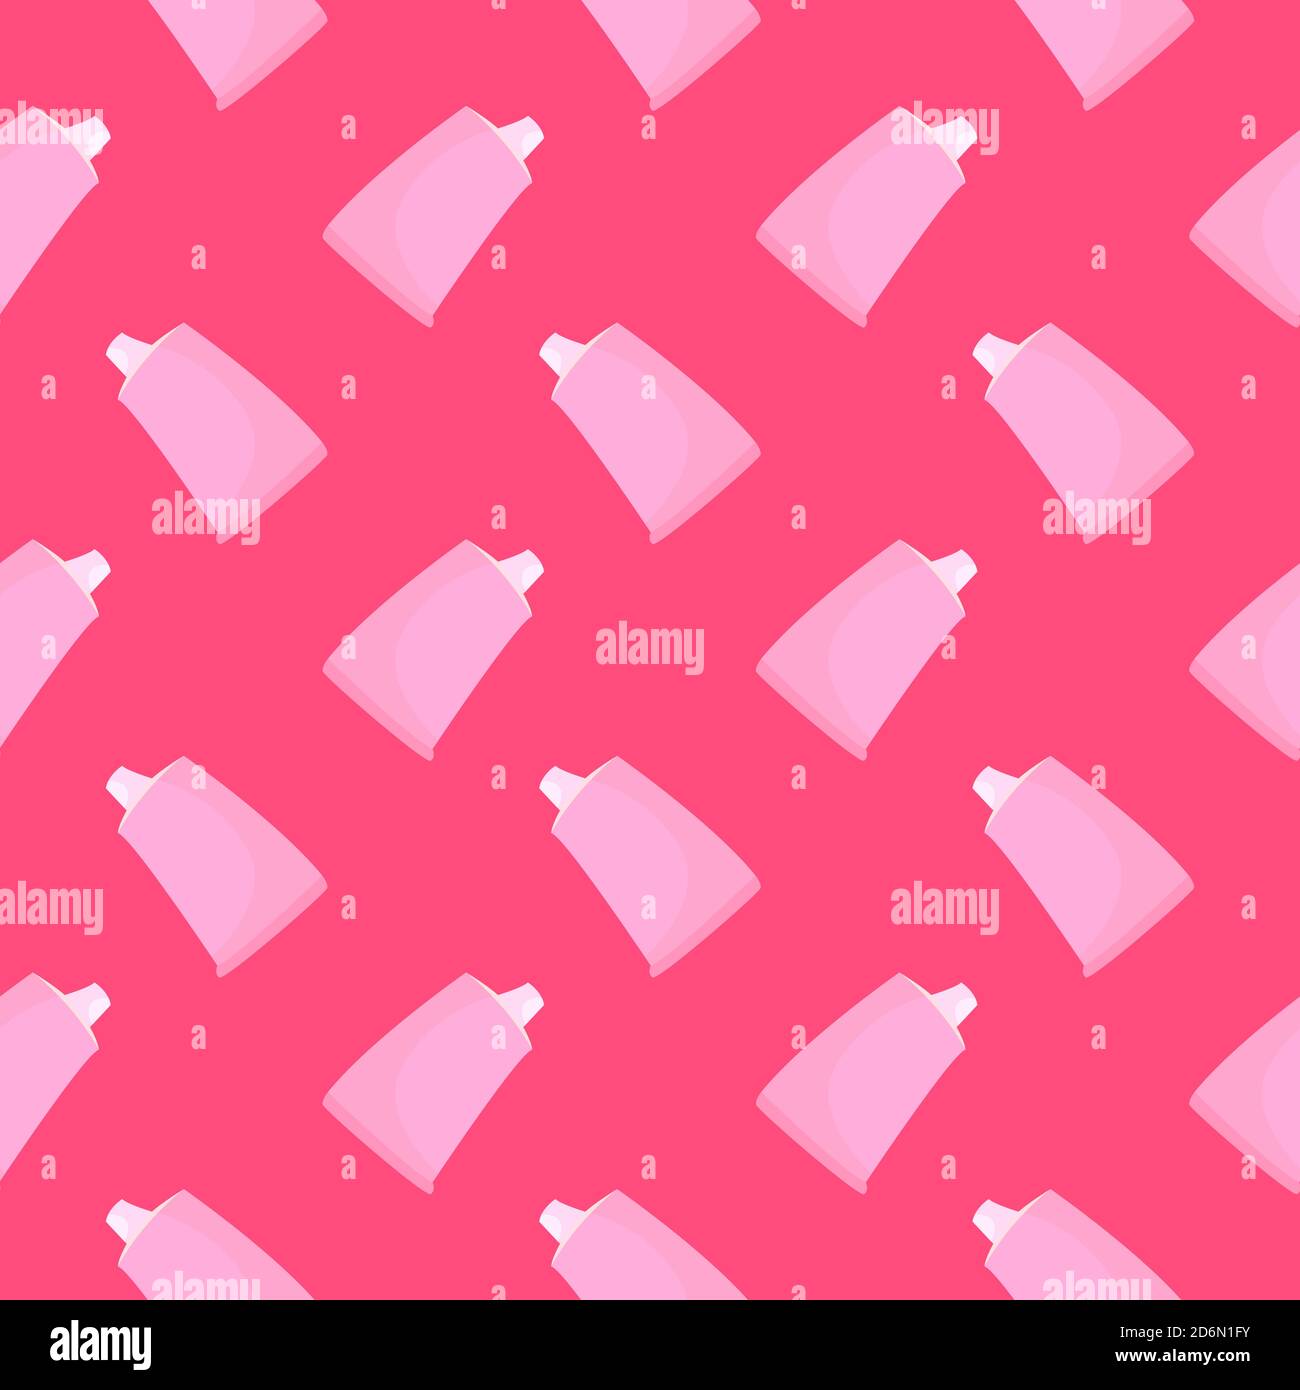 Pink Toothpaste, seamless pattern on hot pink background. Stock Vector